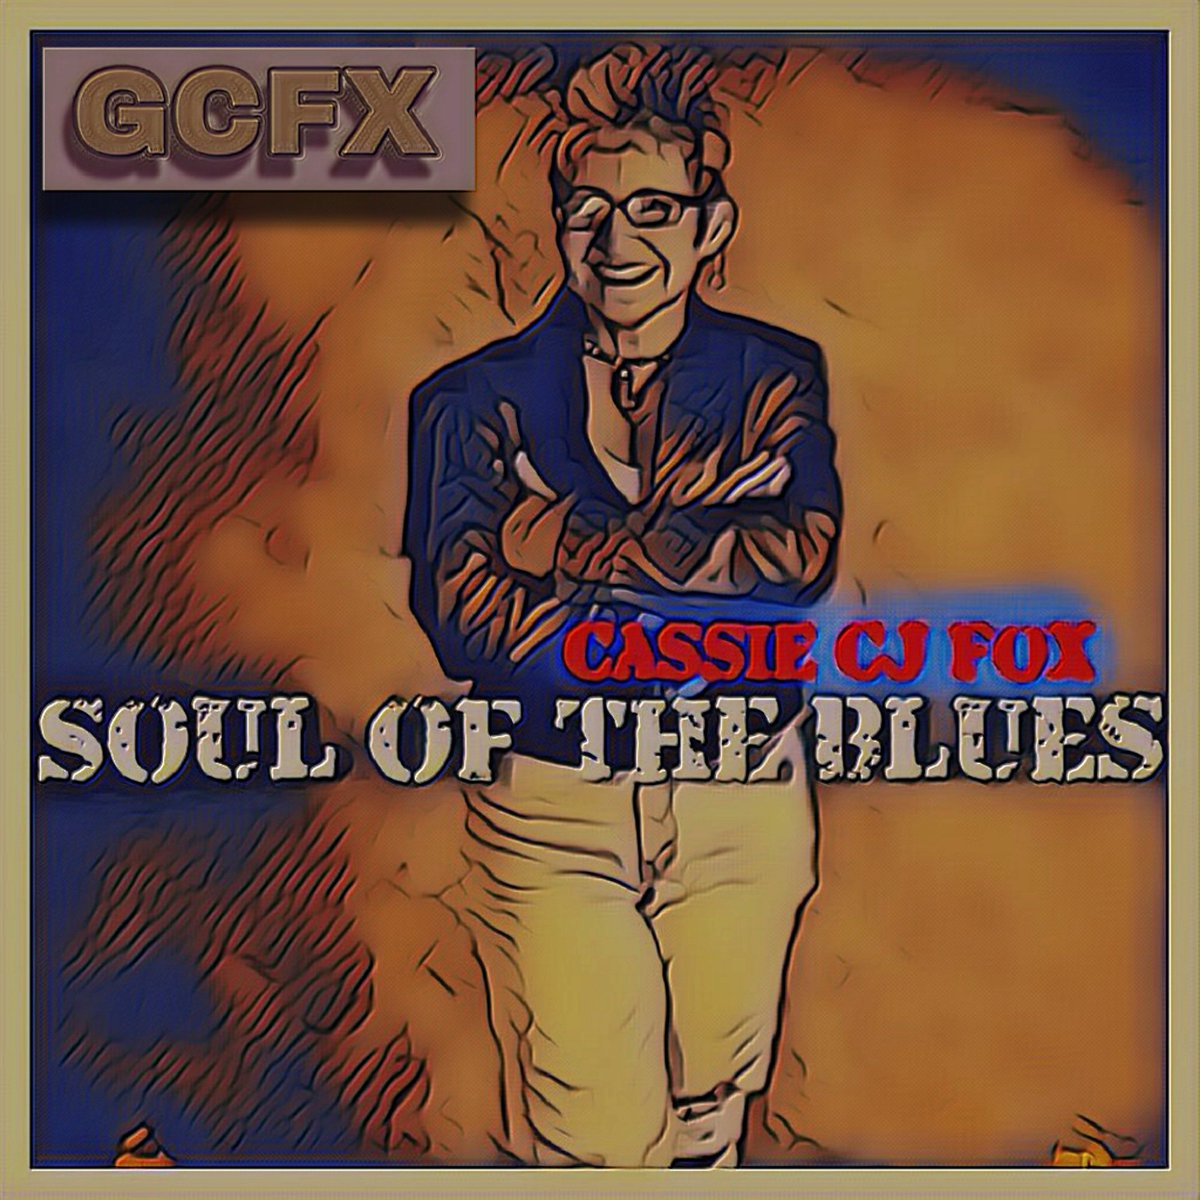 #FridayFeeling More jams on #FeelGoodFriday Get Lit With Me & That Friday Vibe #FunkyFriday @ 12-2pm EST Syndicated 'Soul Of The Blues With Cassie CJ Fox'  live365.com/station/GCFX-G……………………………………………… #SouthernSounds #LunchBreak #GrooveCityFXRadio #GrownFolksMusic